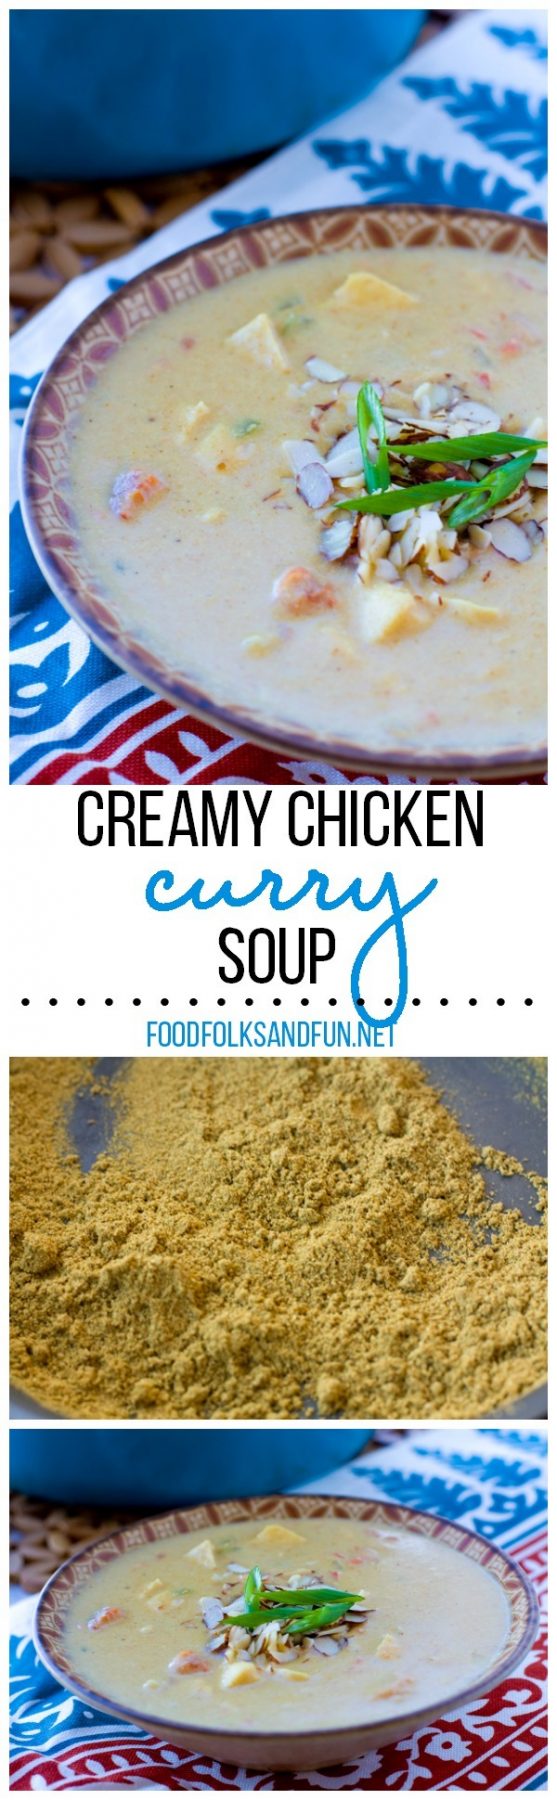 Creamy Chicken Curry Soup